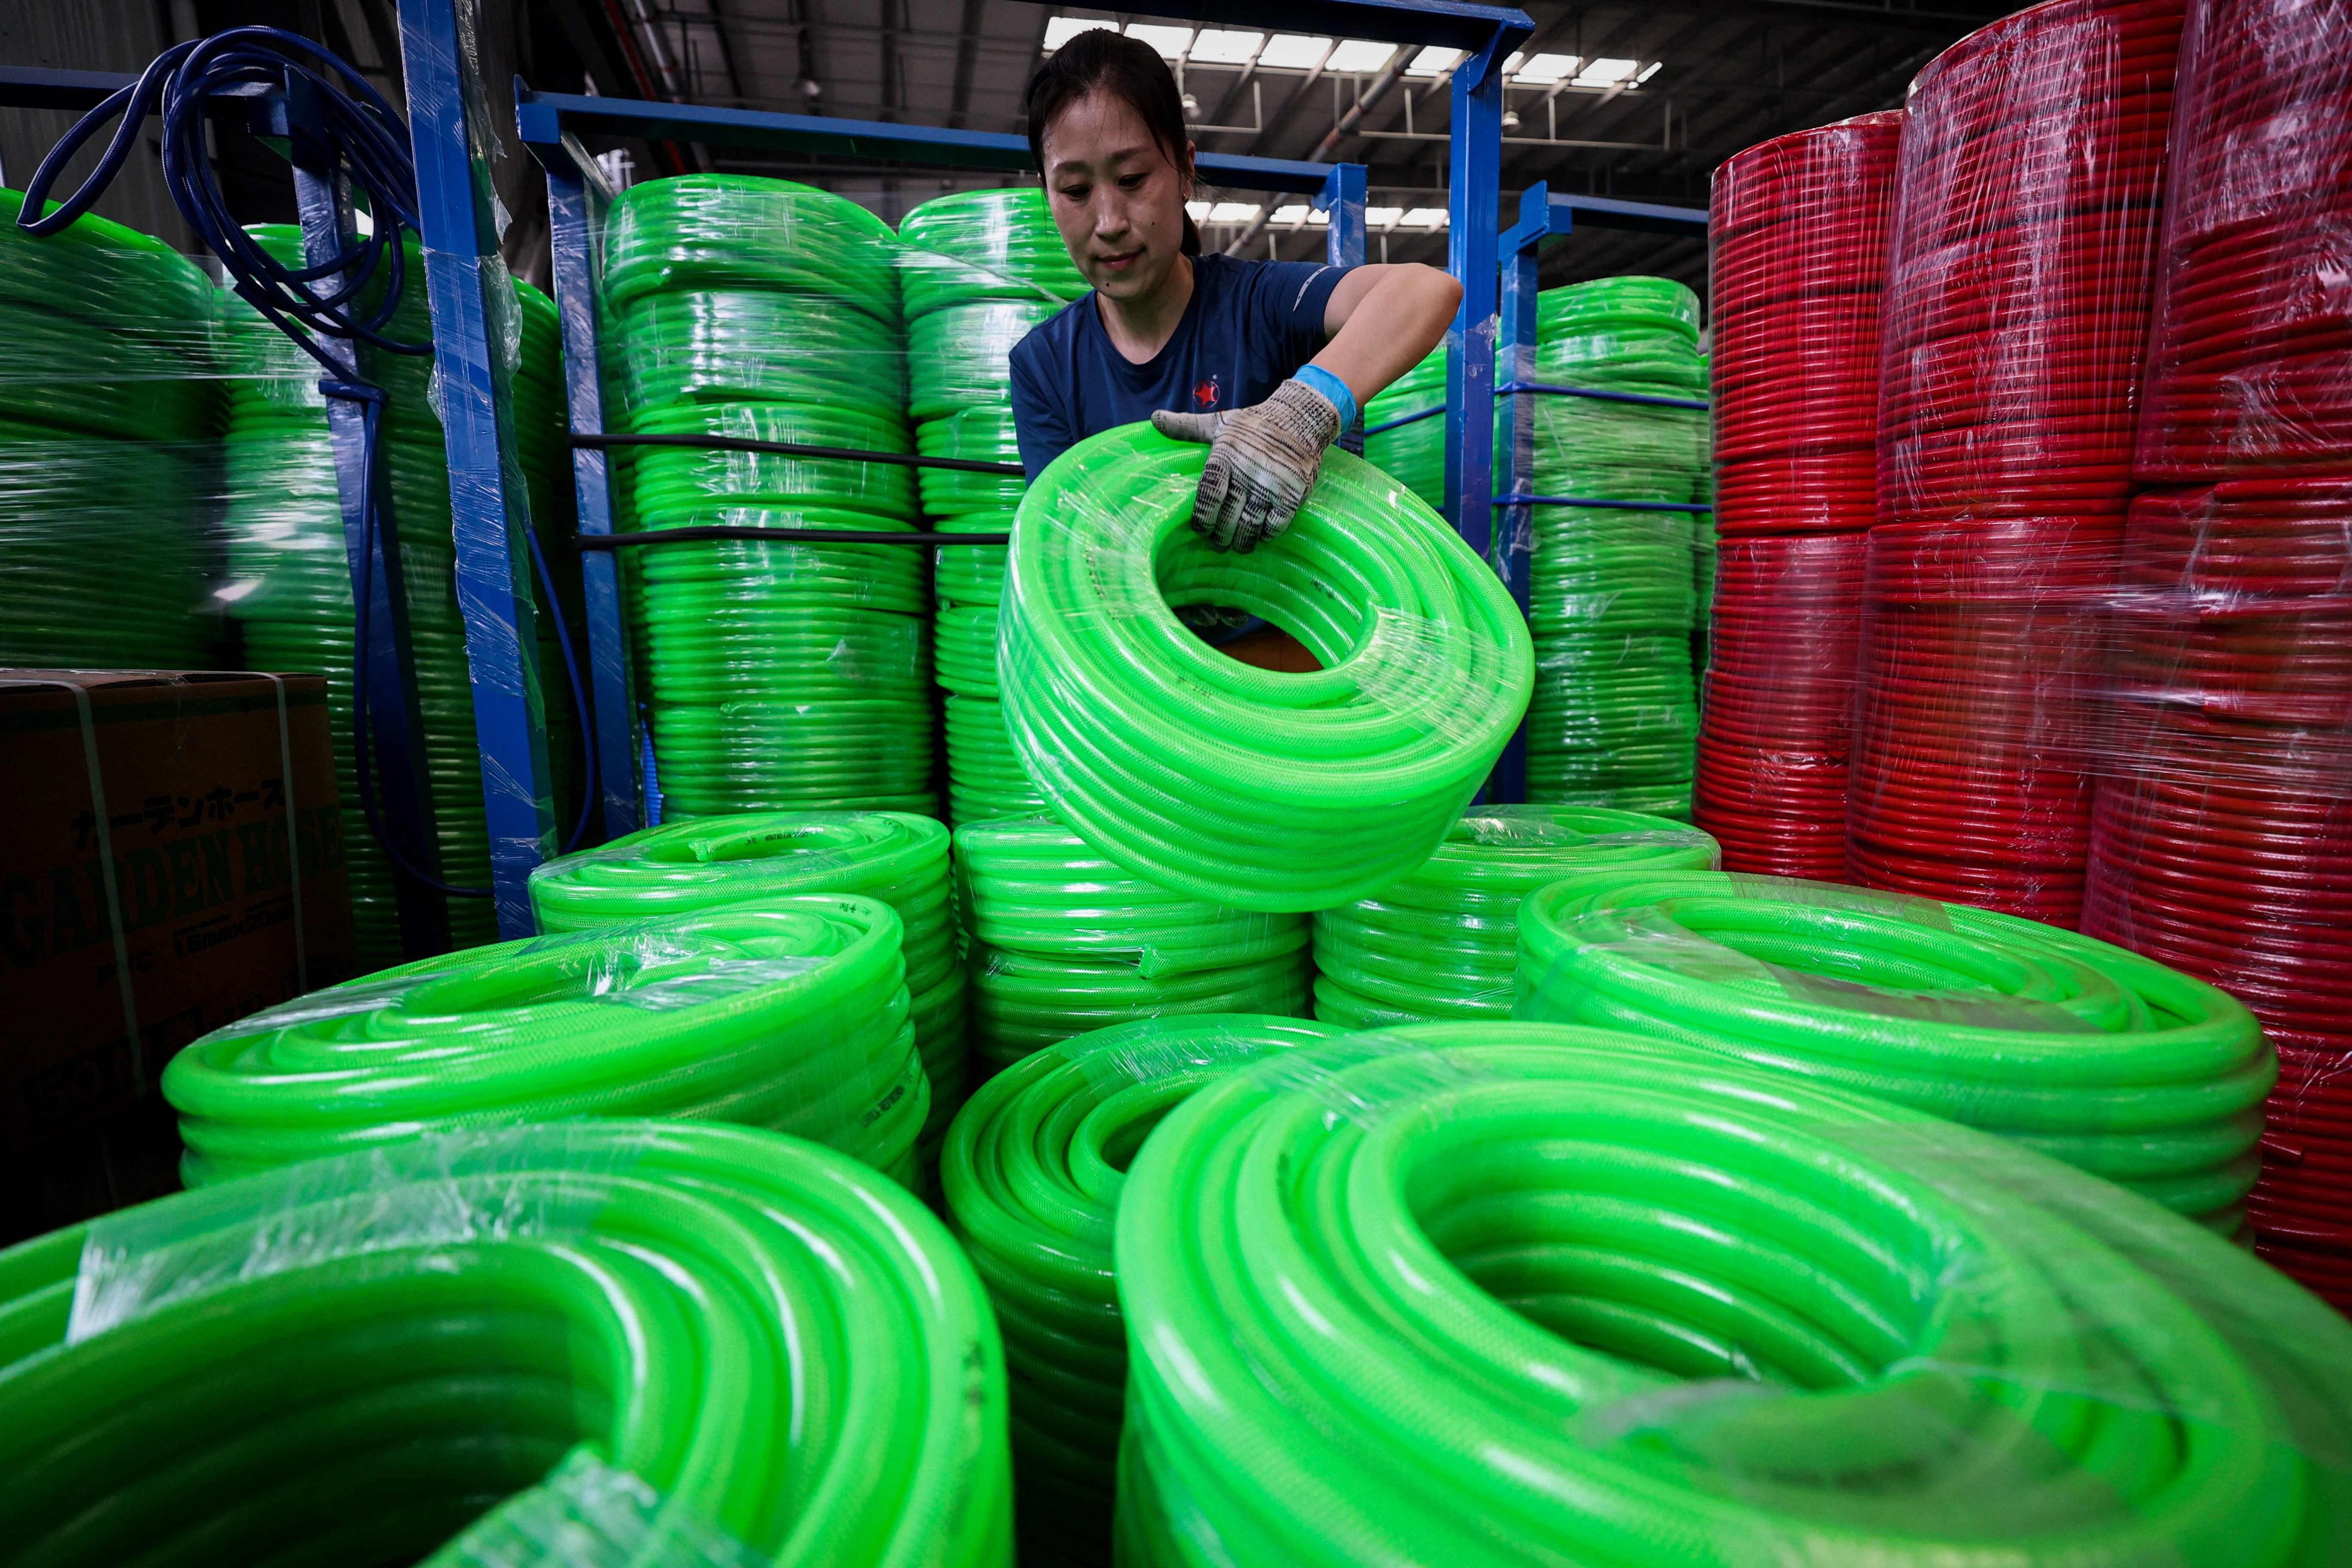 An employee works on a production line at a factory that produces polyethylene flexible pipes for export in Lianyungang, Jiangsu province, on June 20. China’s exports continue to look strong, but concerns persist about the property sector and other parts of the economy. Photo: AFP